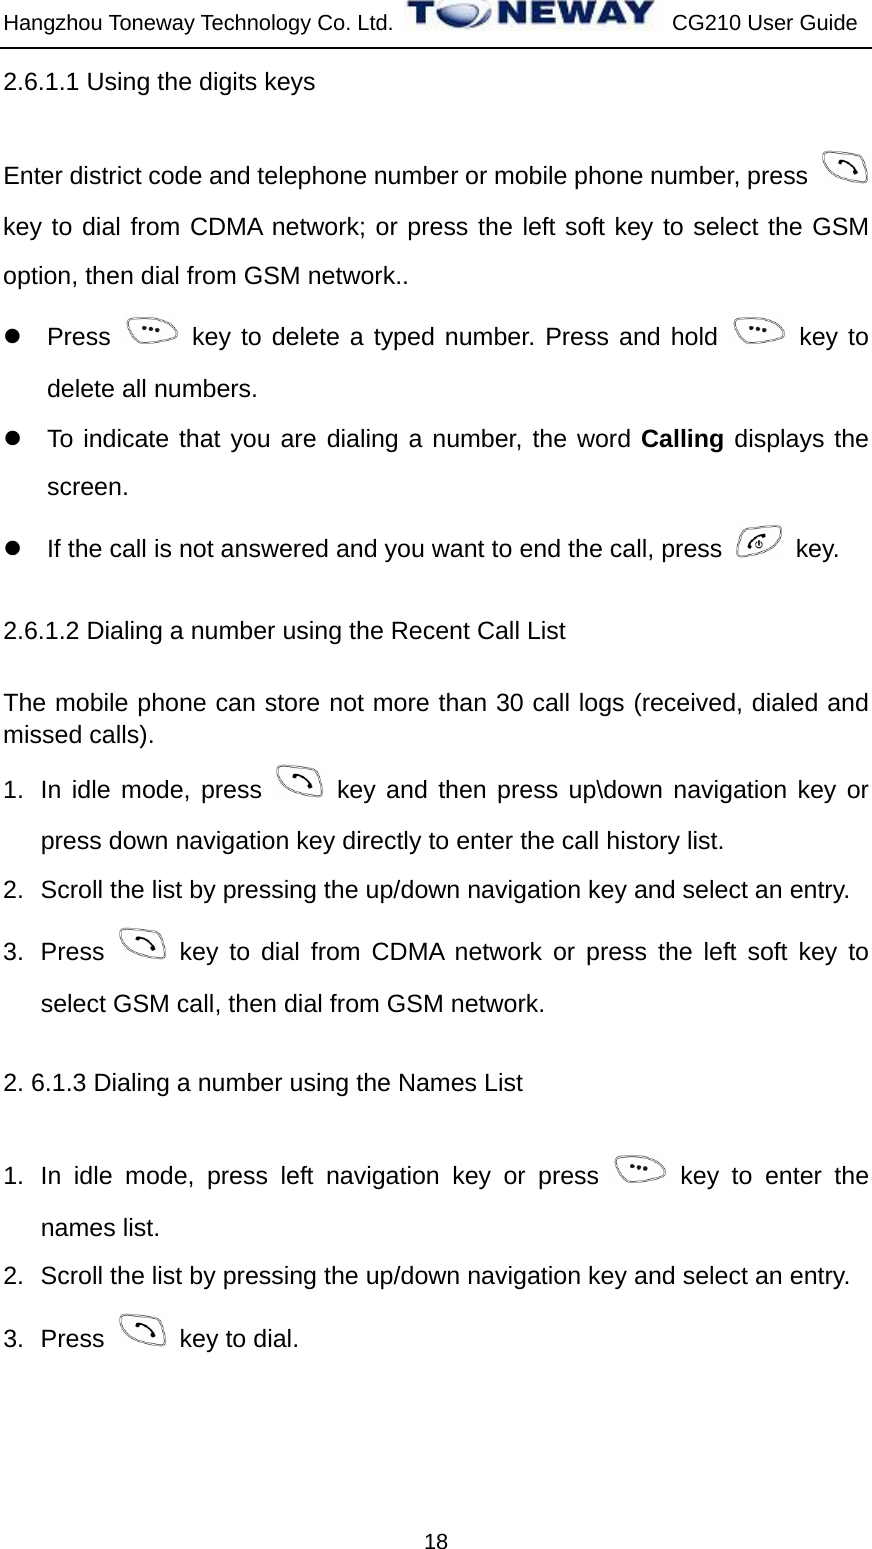 Hangzhou Toneway Technology Co. Ltd.    CG210 User Guide 18 2.6.1.1 Using the digits keys Enter district code and telephone number or mobile phone number, press   key to dial from CDMA network; or press the left soft key to select the GSM option, then dial from GSM network.. z Press   key to delete a typed number. Press and hold   key to delete all numbers. z  To indicate that you are dialing a number, the word Calling displays the screen. z  If the call is not answered and you want to end the call, press   key. 2.6.1.2 Dialing a number using the Recent Call List The mobile phone can store not more than 30 call logs (received, dialed and missed calls). 1.  In idle mode, press   key and then press up\down navigation key or press down navigation key directly to enter the call history list. 2.  Scroll the list by pressing the up/down navigation key and select an entry. 3. Press   key to dial from CDMA network or press the left soft key to select GSM call, then dial from GSM network. 2. 6.1.3 Dialing a number using the Names List 1.  In idle mode, press left navigation key or press   key to enter the names list. 2.  Scroll the list by pressing the up/down navigation key and select an entry. 3. Press    key to dial. 